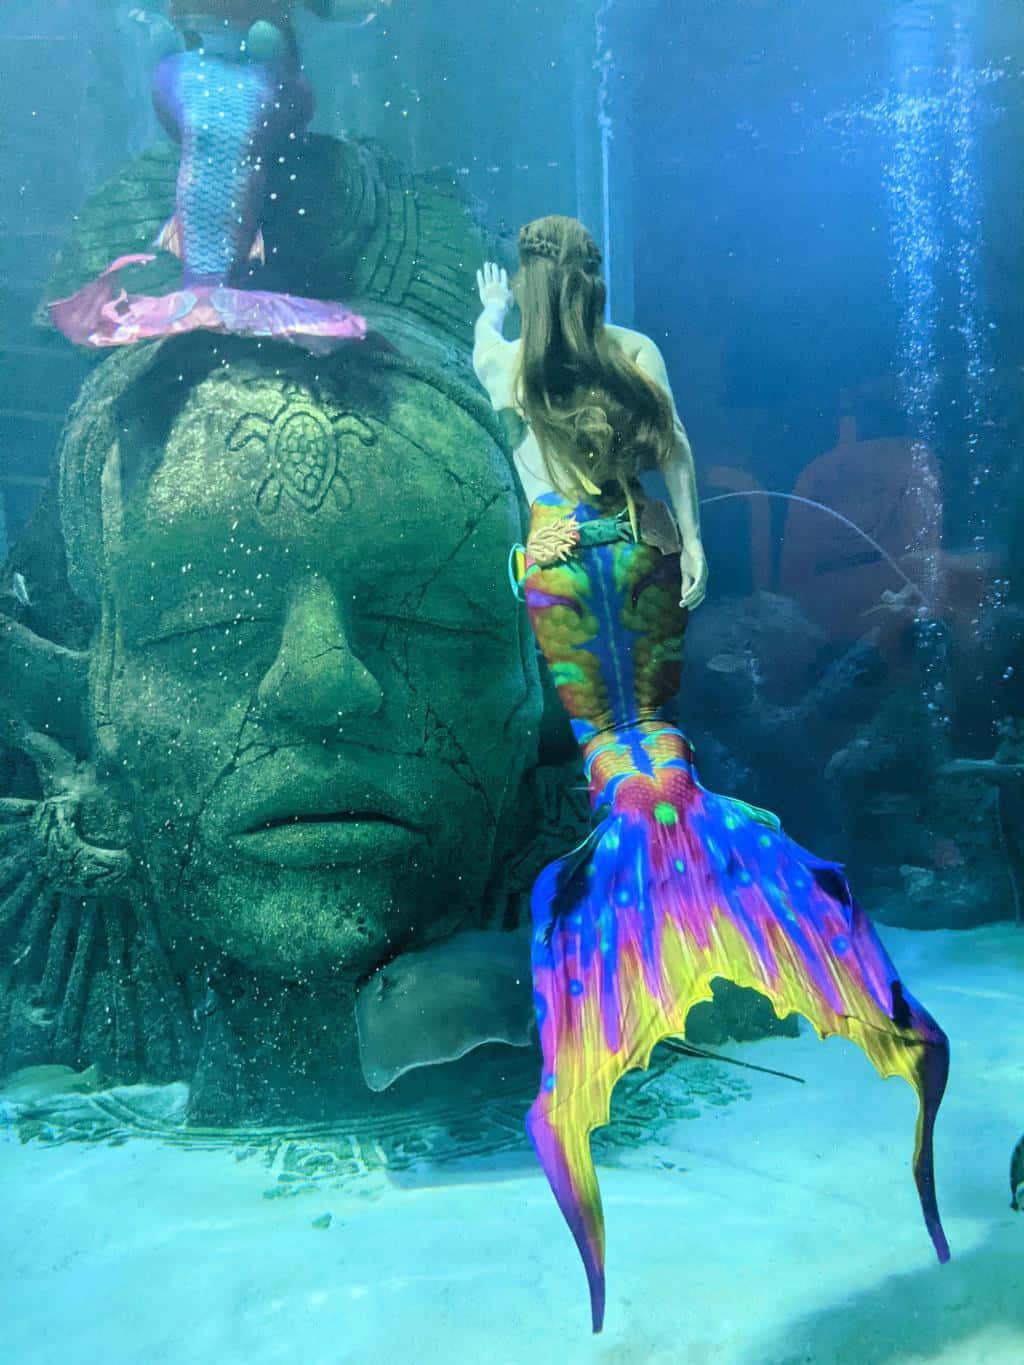 "Come marvel at the beauty of a real mermaid and lose yourself in a magical aquatic world."